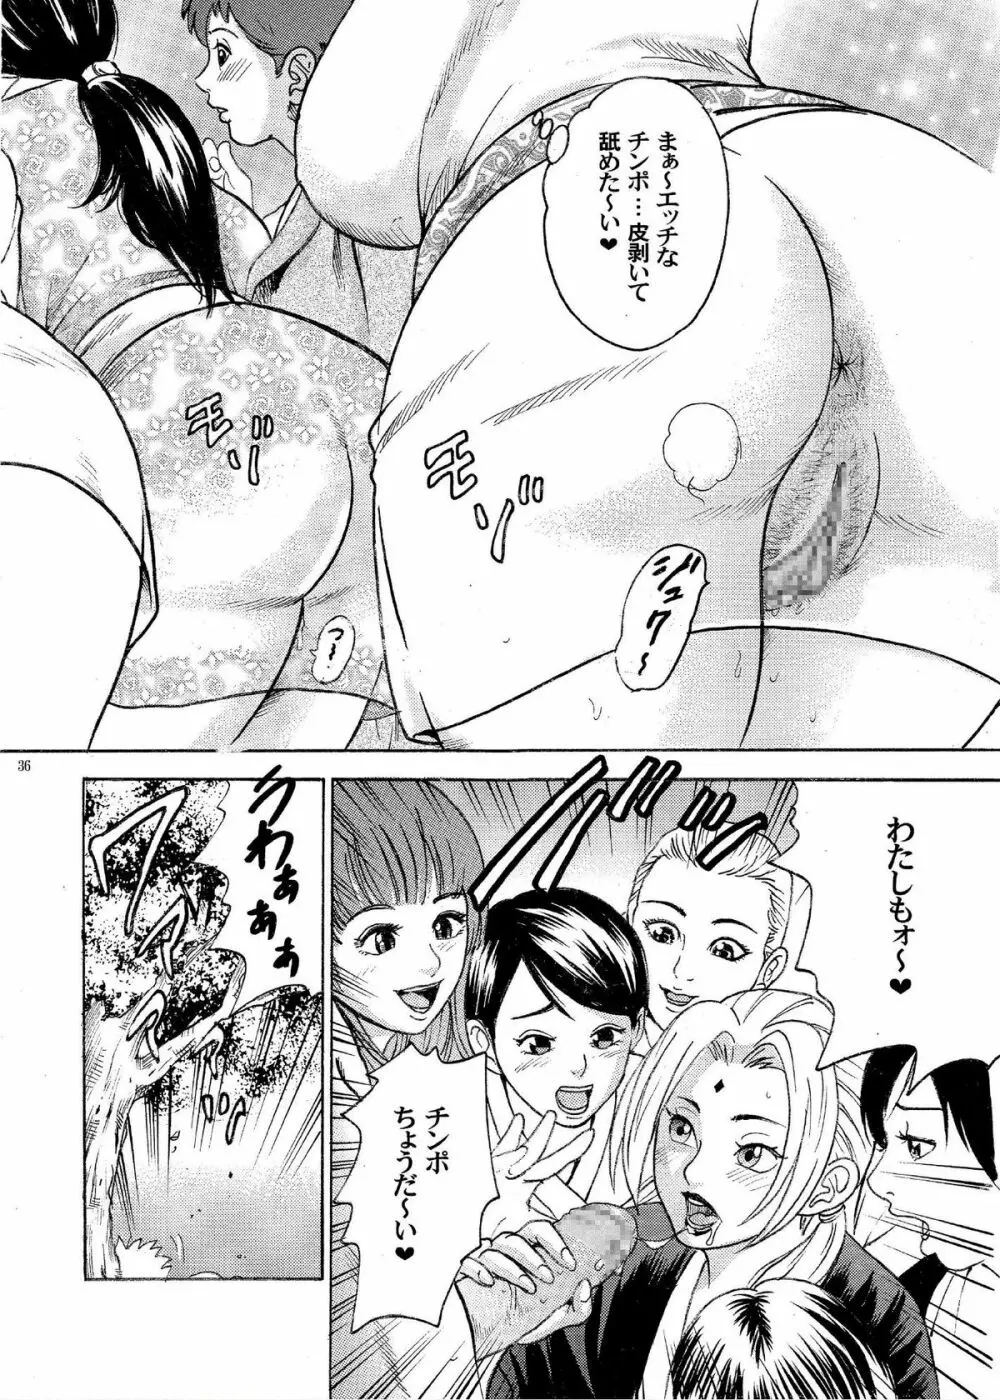 ParM SpeciaL 1 淫忍試験 Page.34